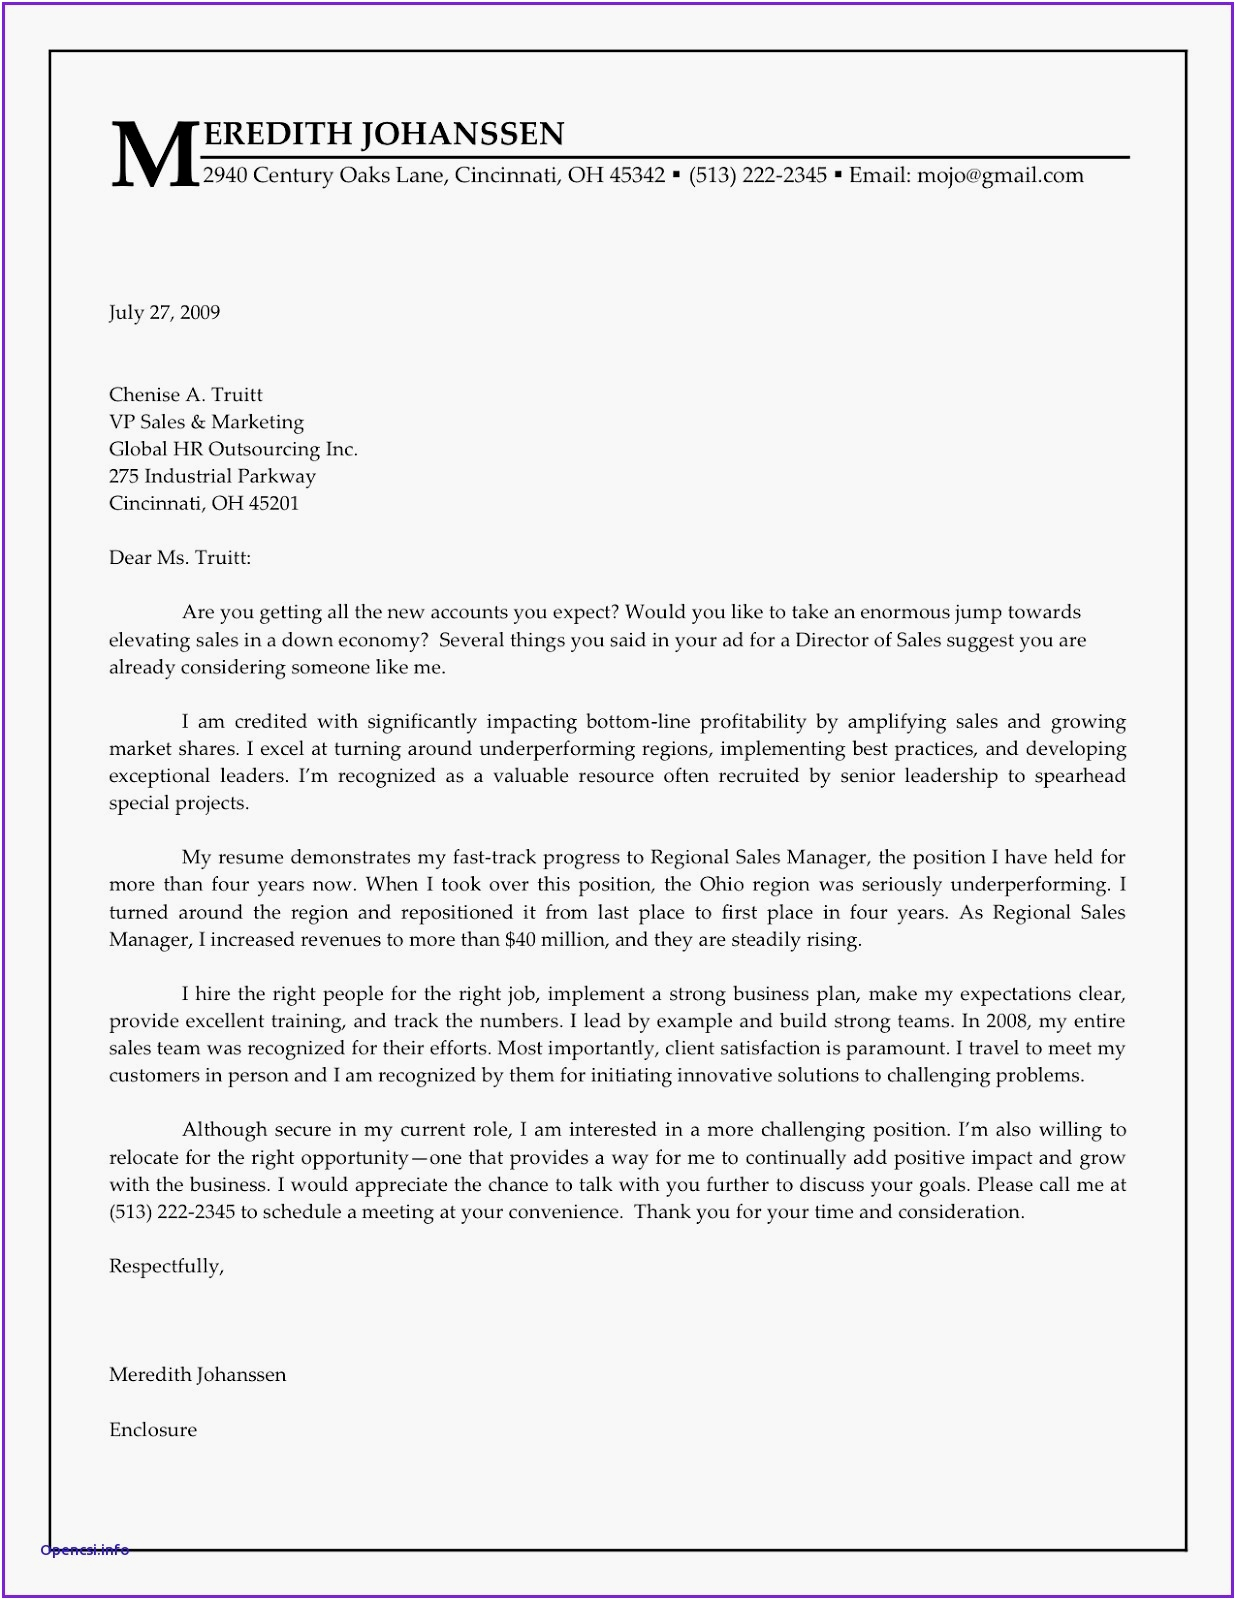 business letter template google docs Collection-Resume Templats Fresh formatted Resume 0d New Free Business Letter Templates from Templates Google Docs source 1-b